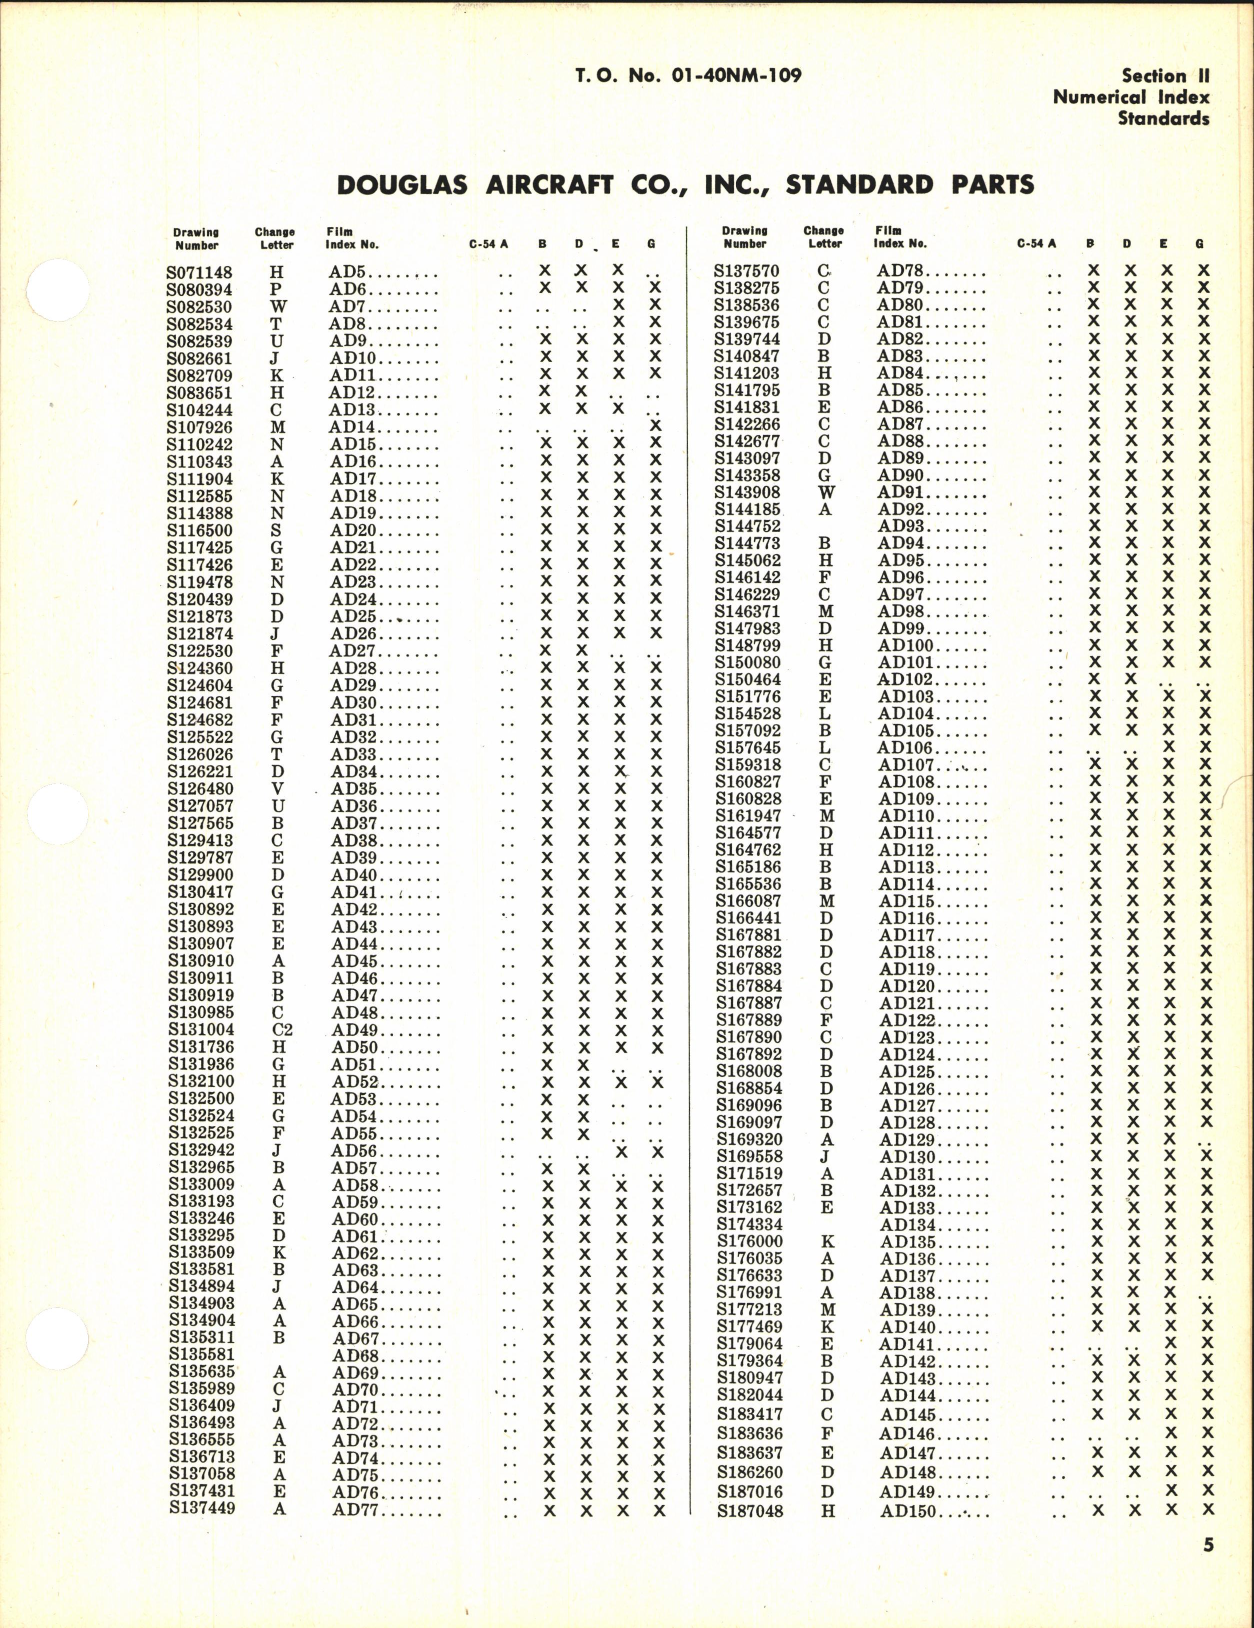 Sample page 7 from AirCorps Library document: Index of Drawings on Microfilm for C-54